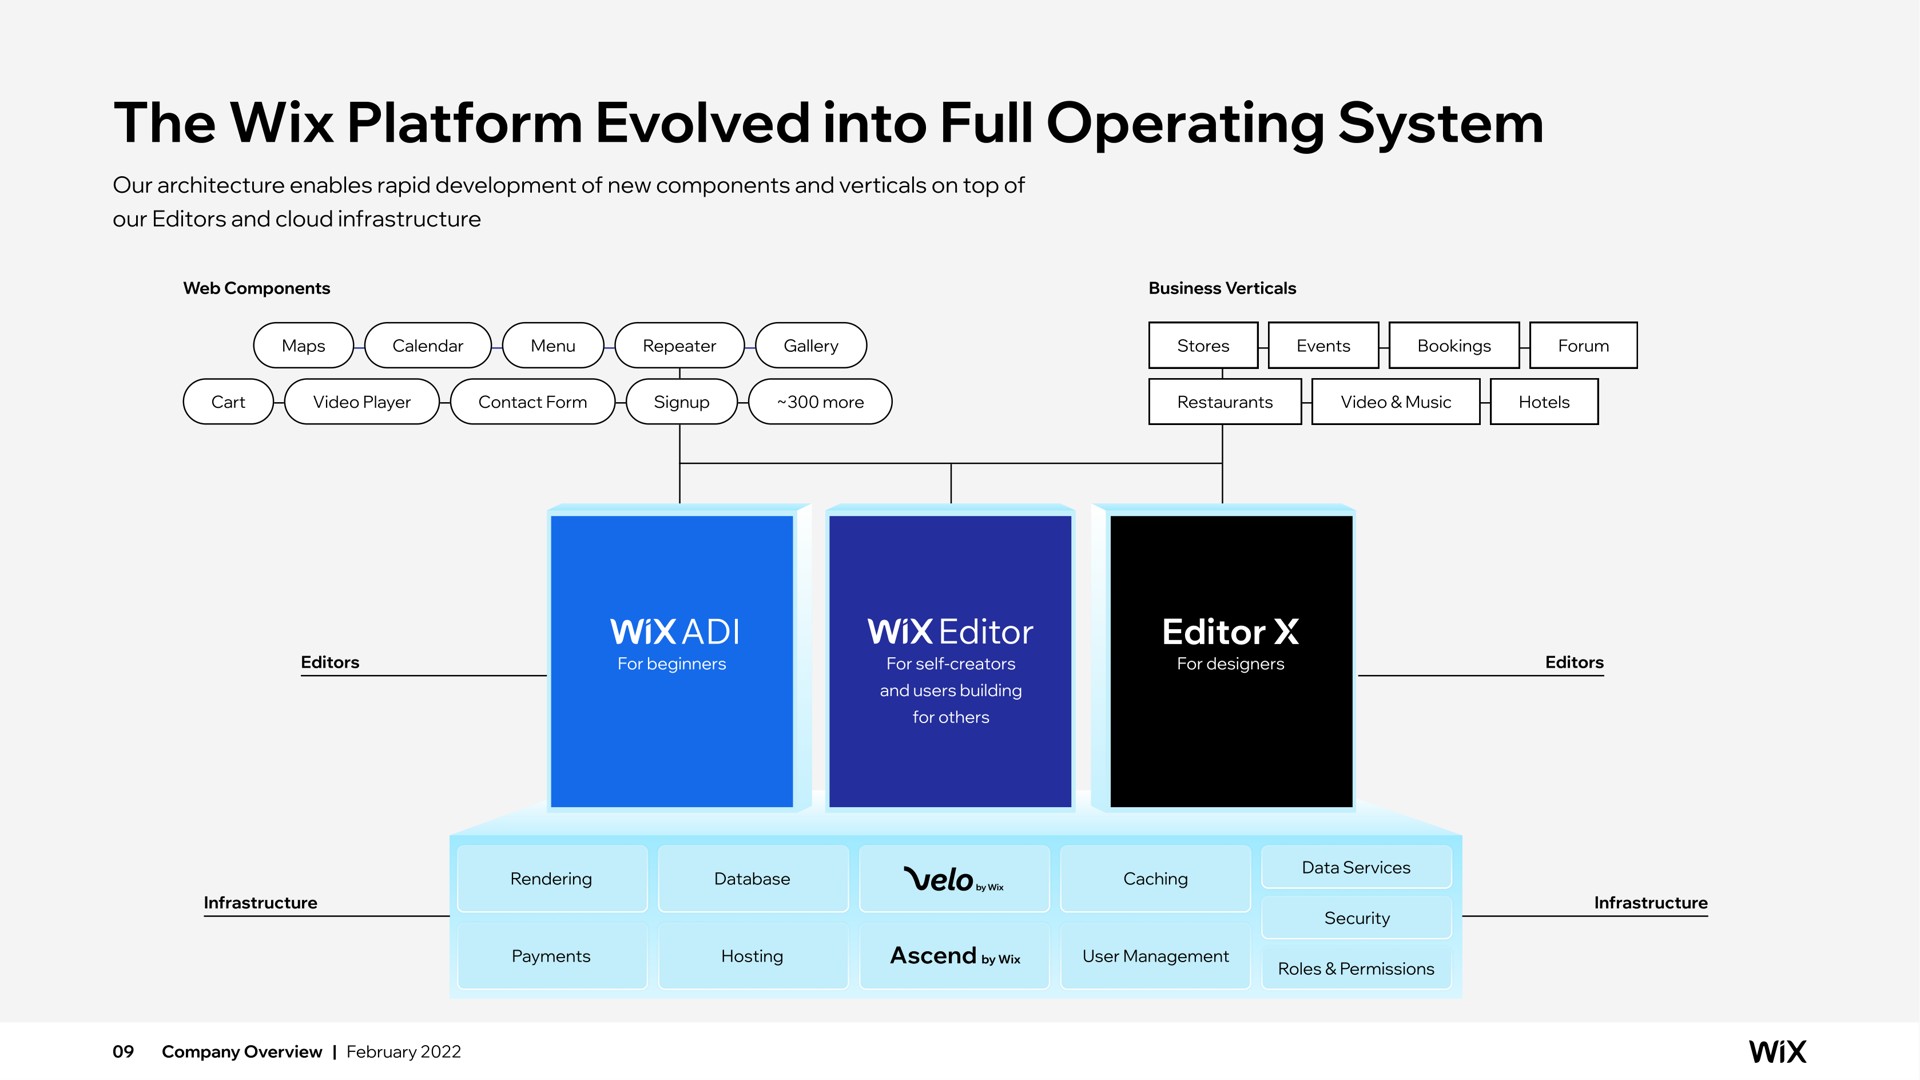 the platform evolved into full operating system | Wix